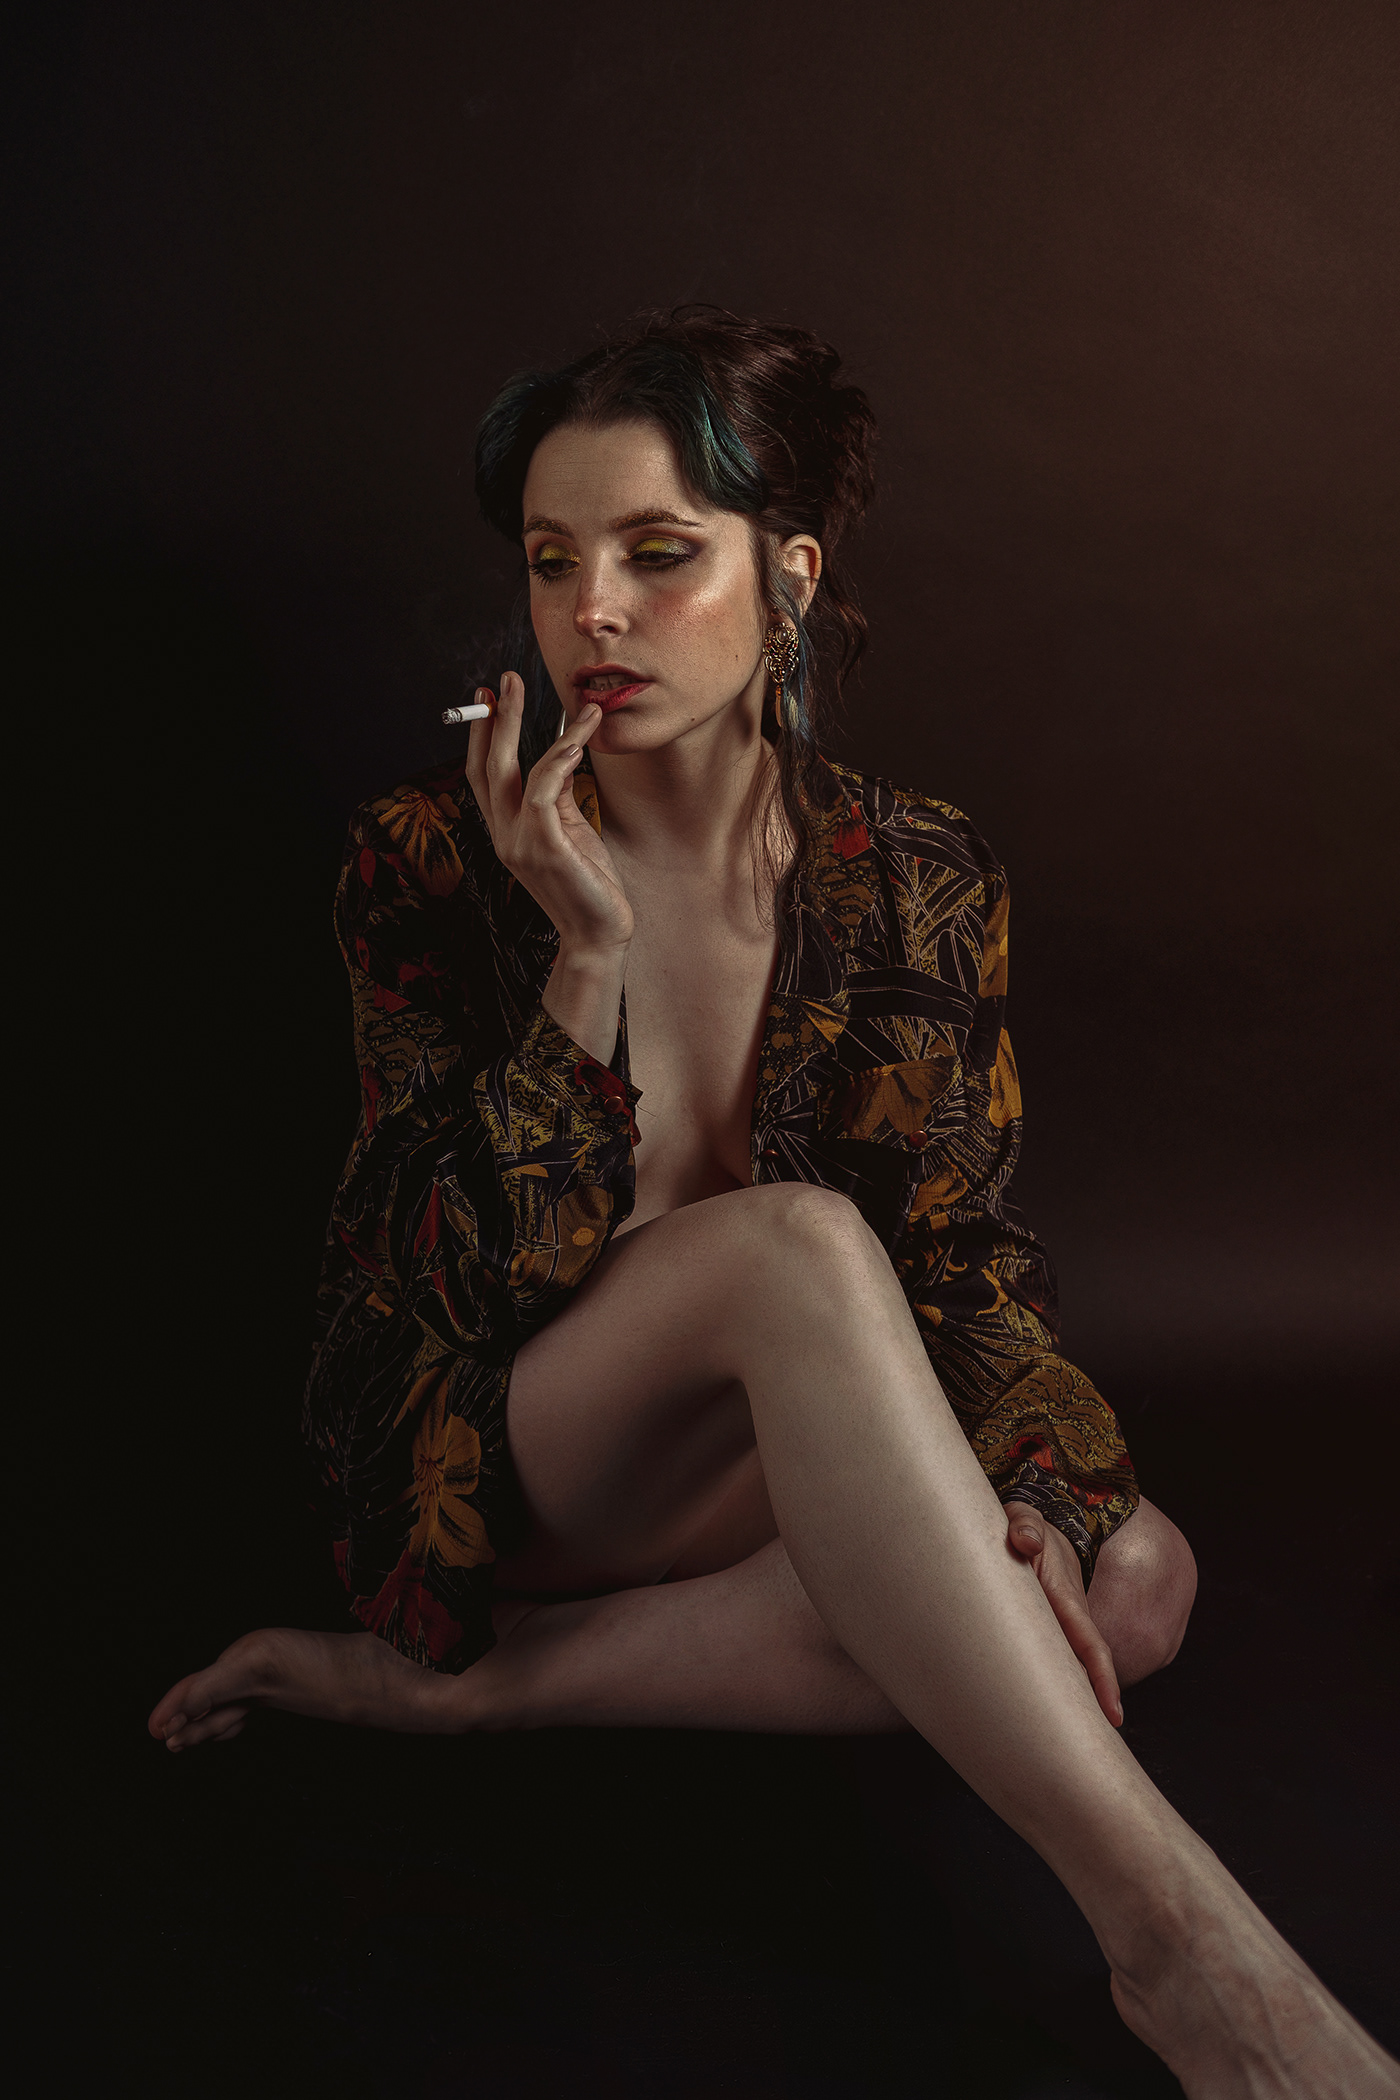 Portrait photography of a girl smoking cigarette in studio with black background and flash